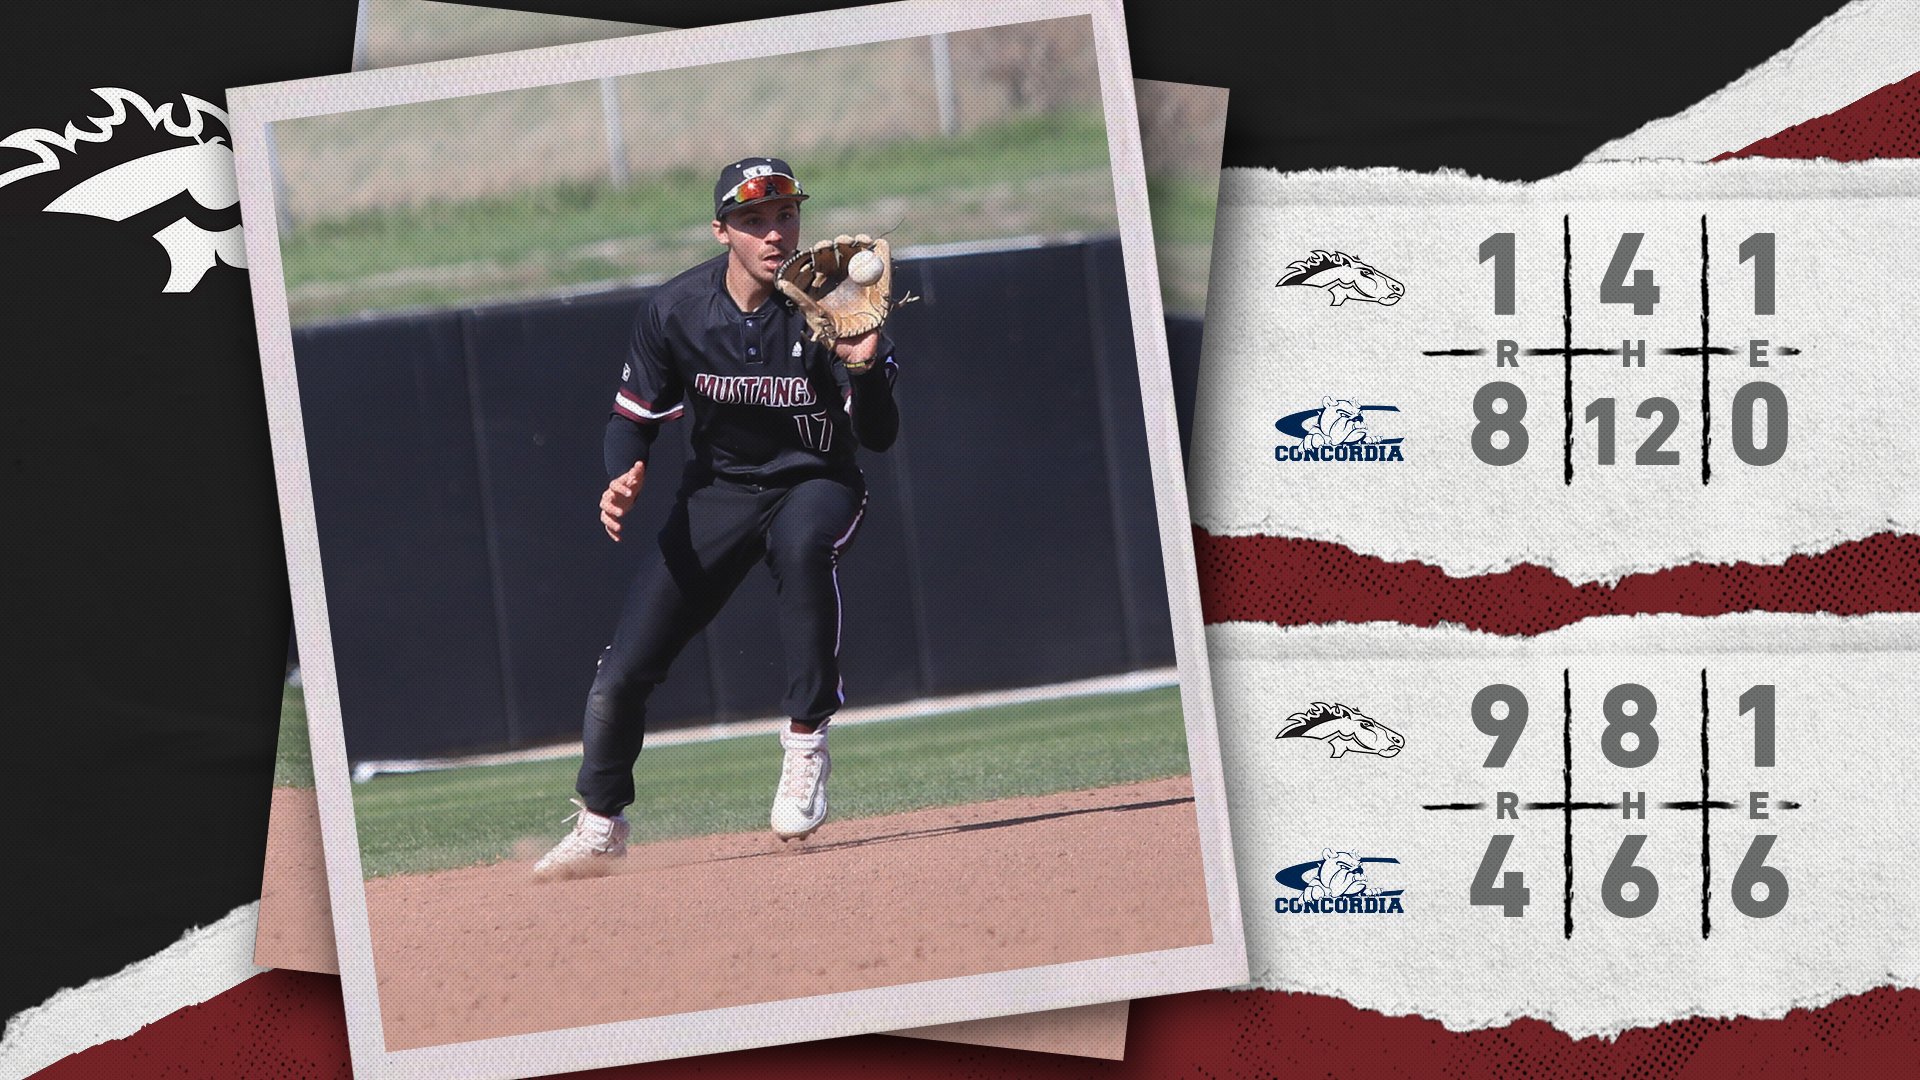 Morningside splits opening doubleheader at Concordia